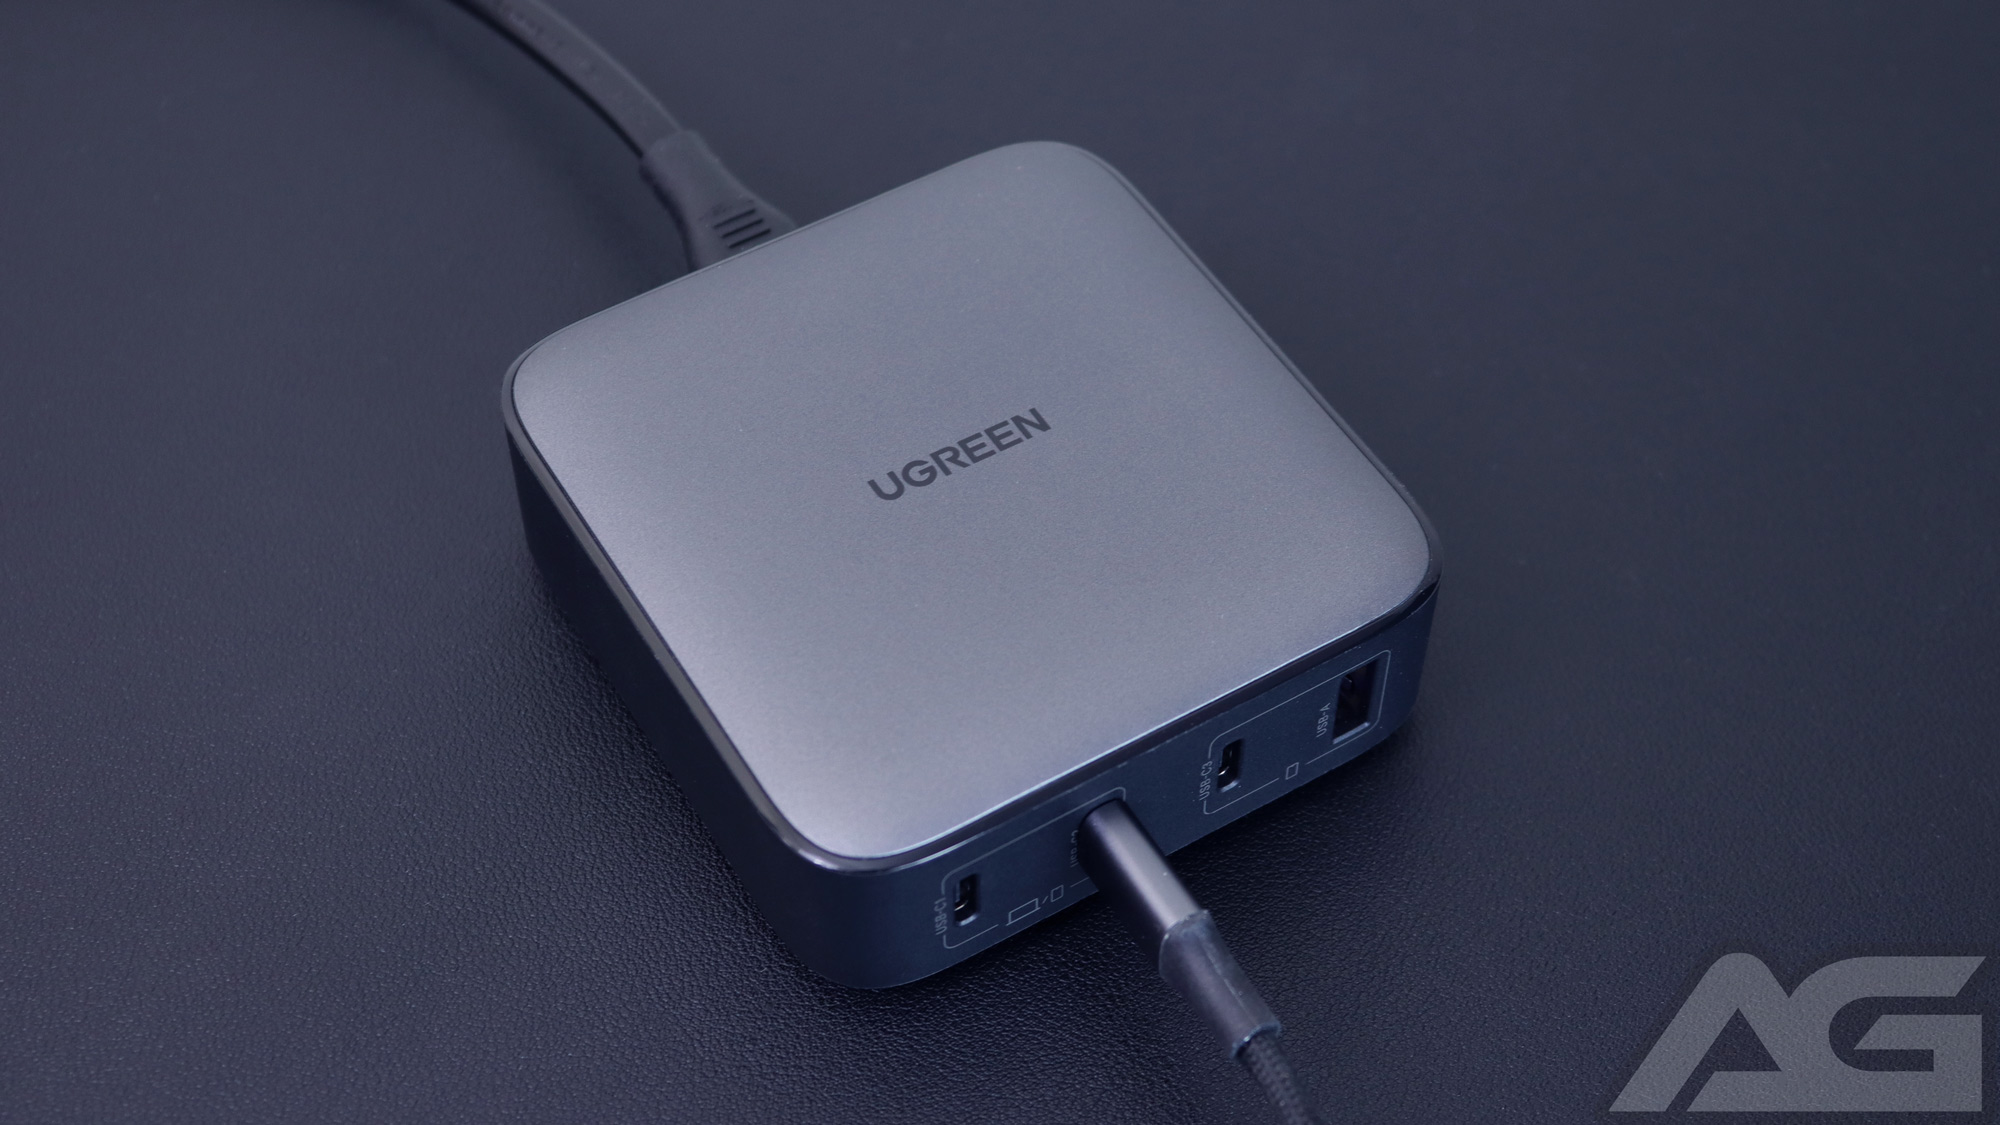 UGREEN Nexode 65W USB C Charger - My Helpful Hints® Review